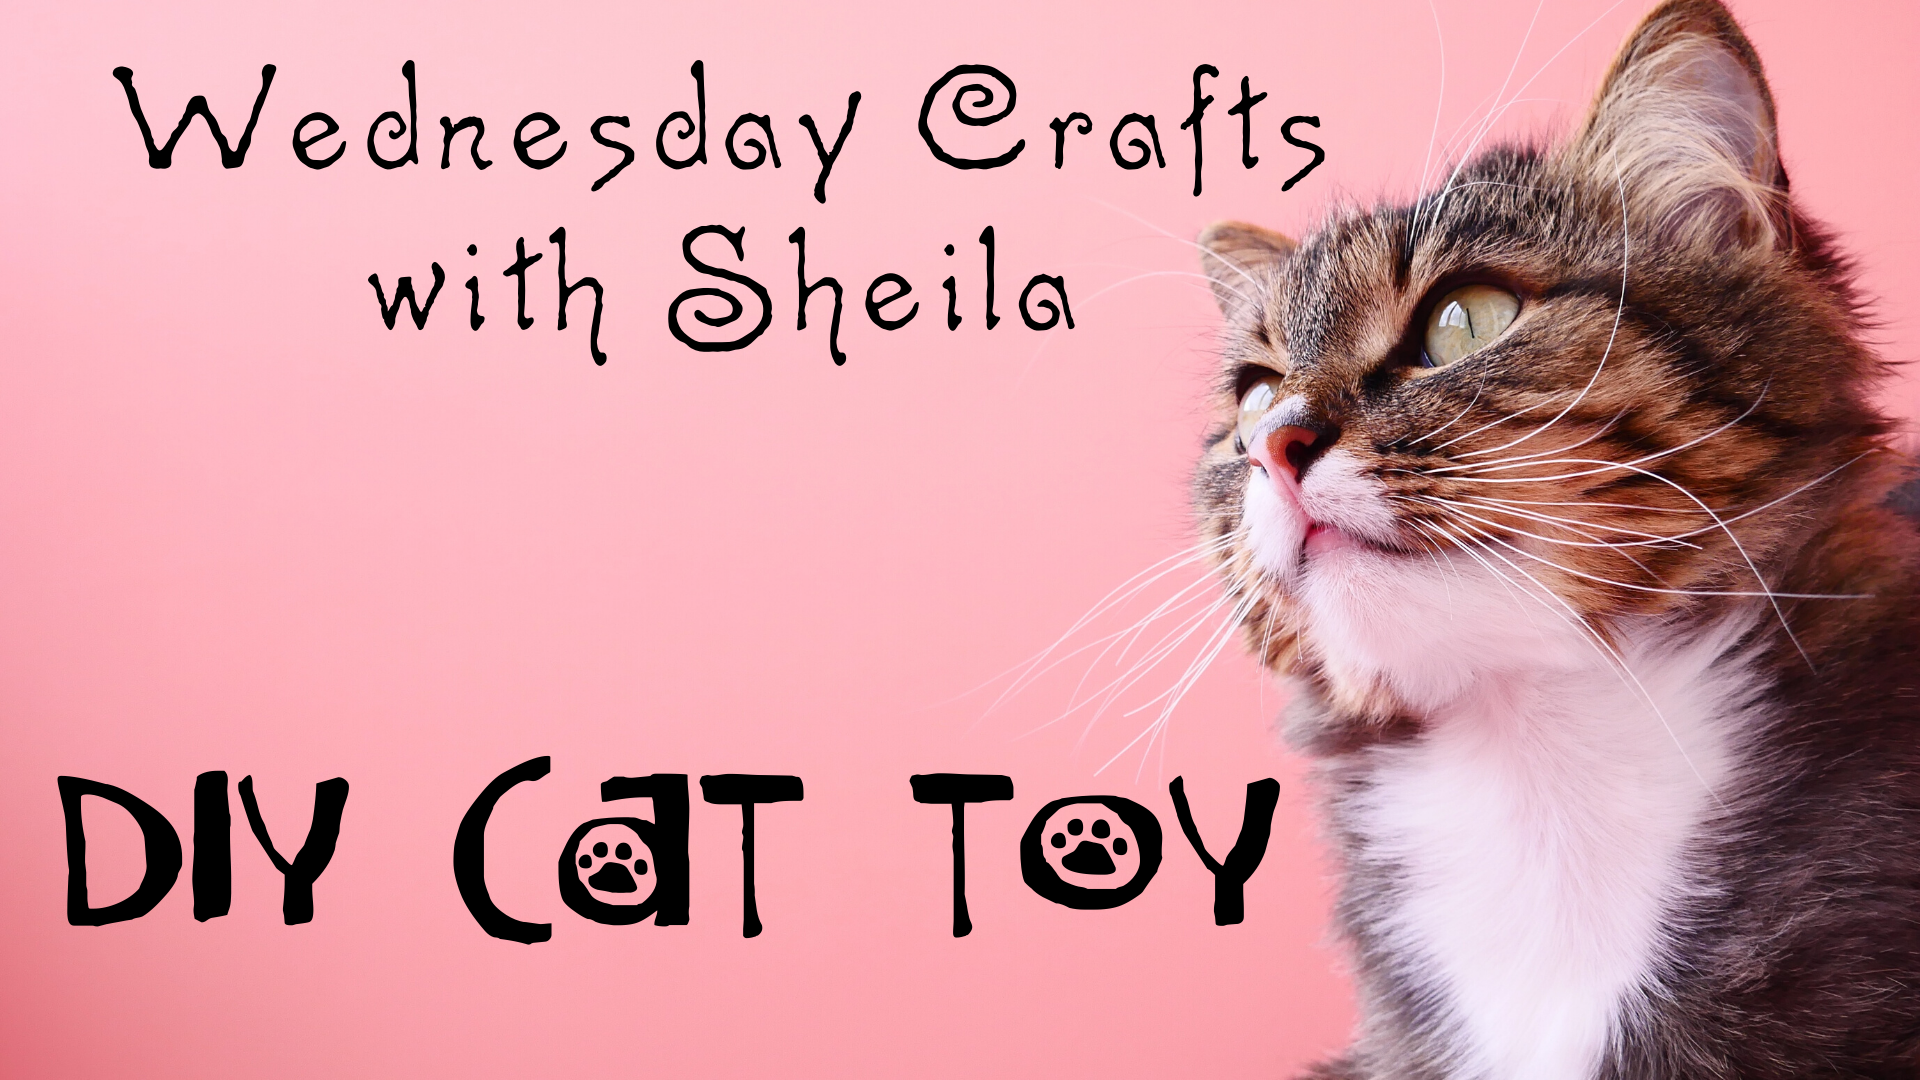 Wednesday Craft with Sheila - DIY Feather Cat Toy